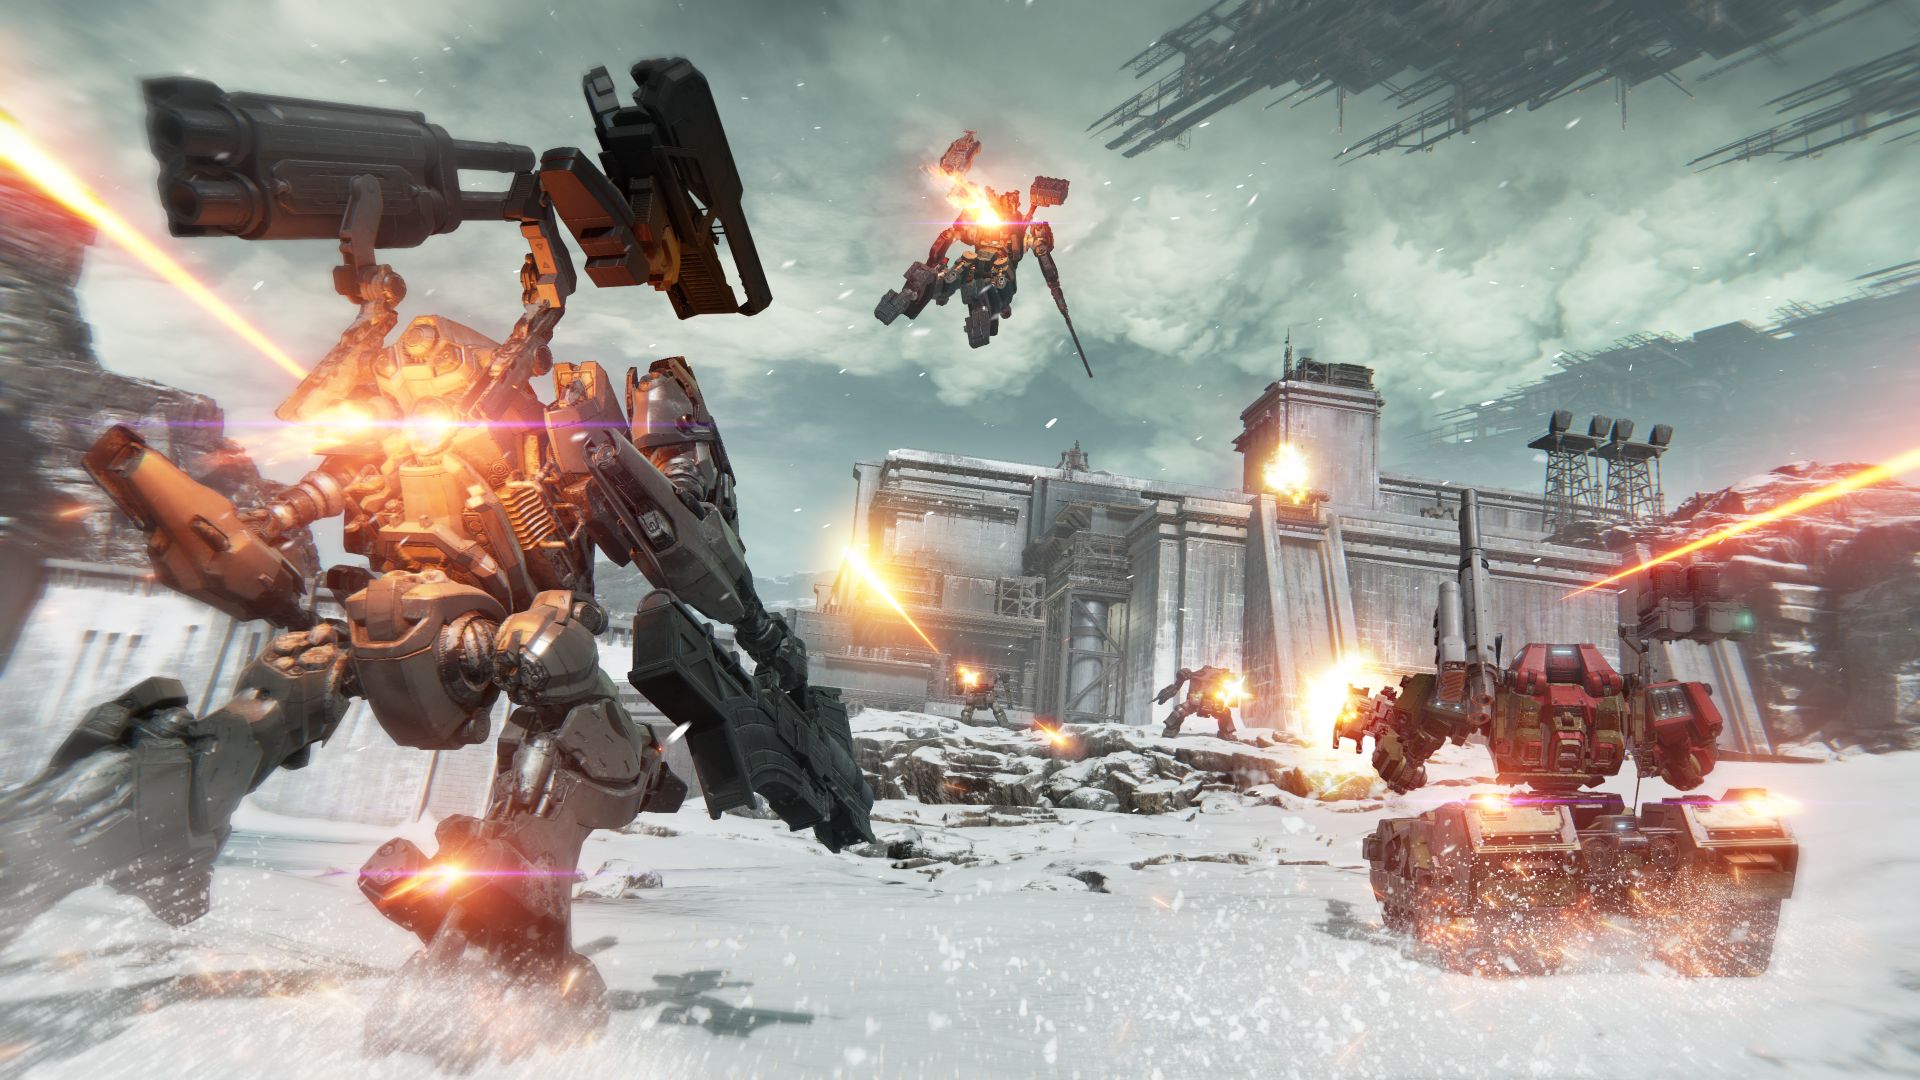 Armored Core VI: Fires Of Rubicon, From Software's Next Game, Gets